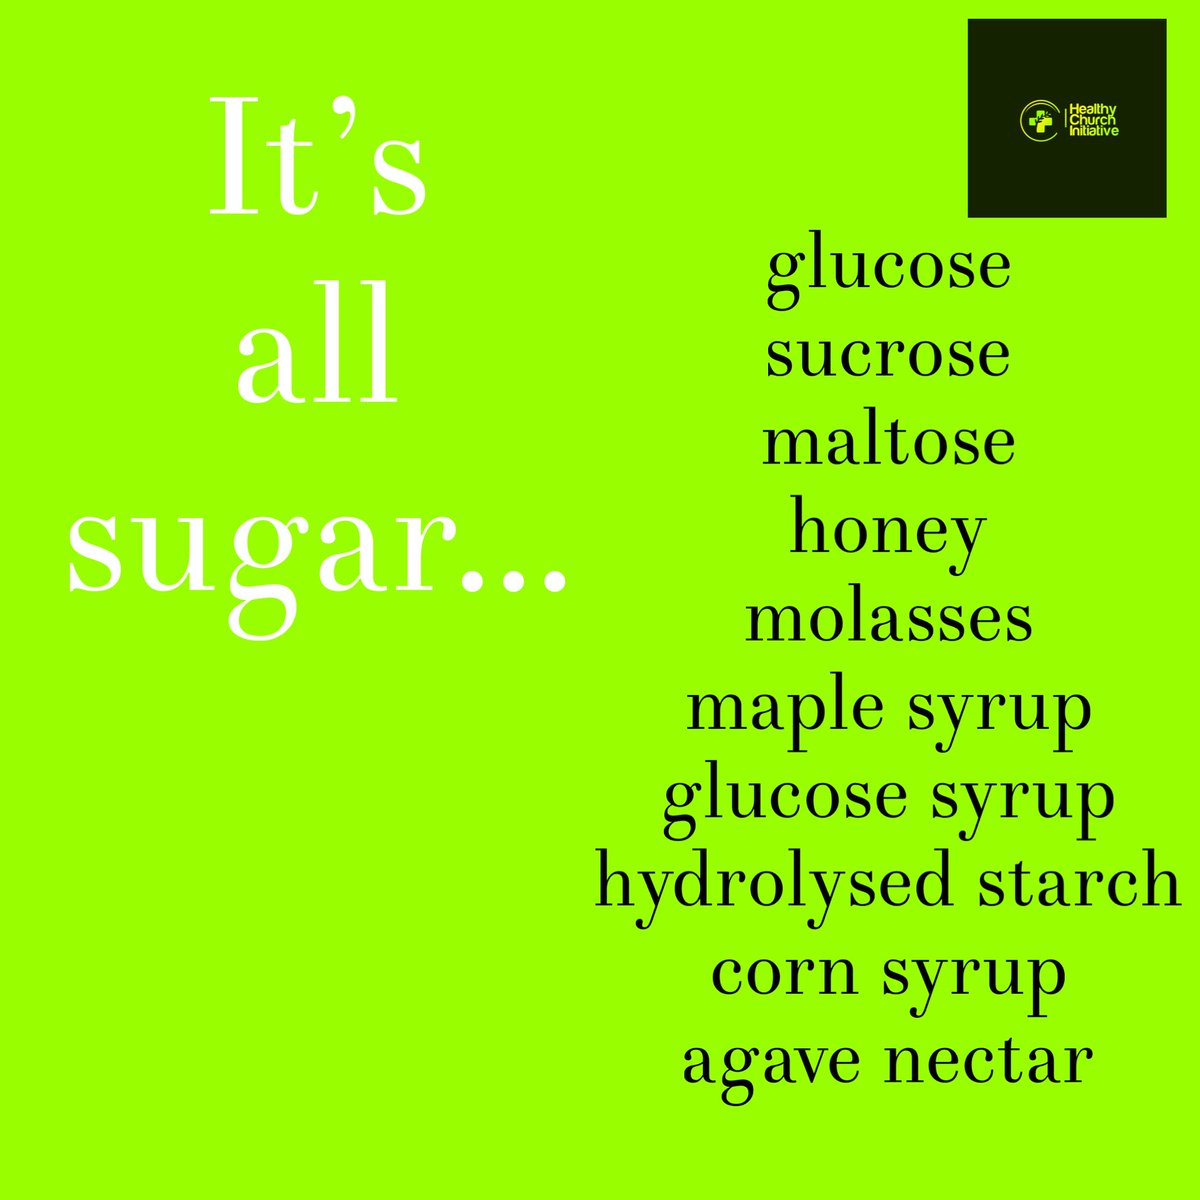 #HCI is a 6week programme for #Blackchurches.
Week2 we cover all things #sugar. Honey, agave nectar & maple syrup & molasses are often marketed as ‘healthier’ but they are just other forms of #sugar. @CinnamonNetwork @MulticulturalMC @HWSouthwark @kelly_ibrahim